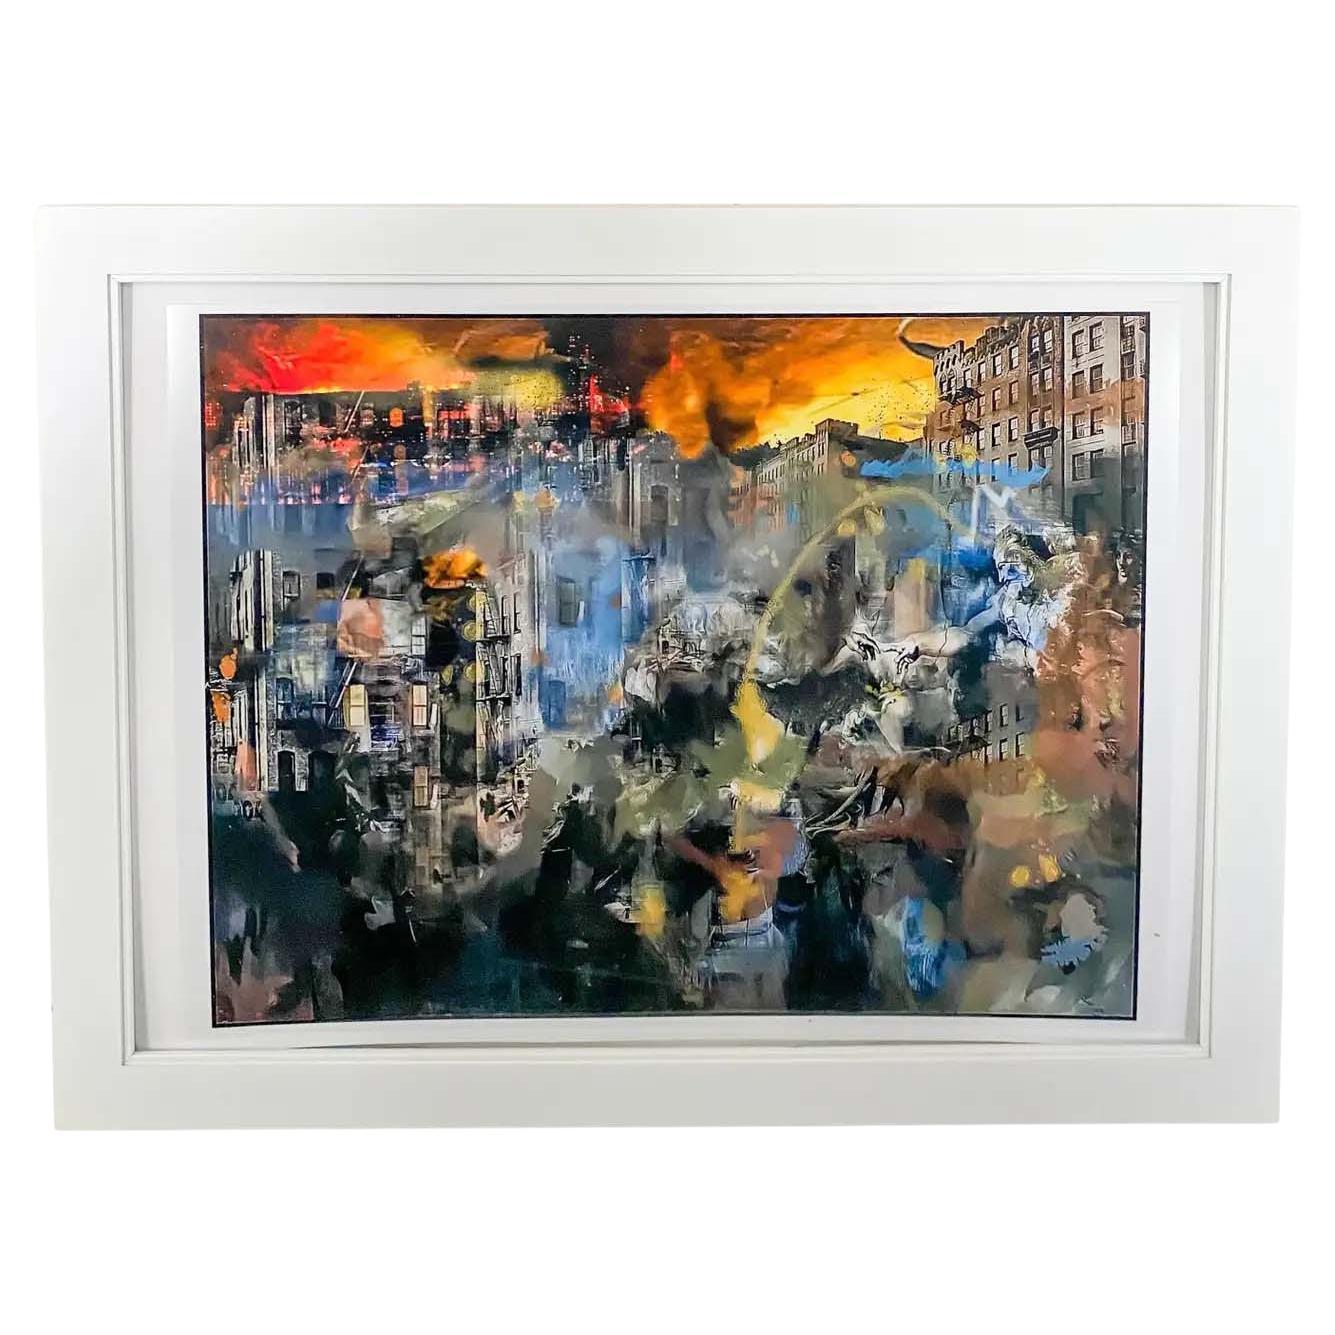 An exceptional mixed media photo collage printed on ultra premium photo luster by the contemporary artist Marc Vandermeer ( American, 1950's). The art work entitled "End of Days" and depicts a city in flames. 

Dimensions: 21” H x 27” W x 0.5”